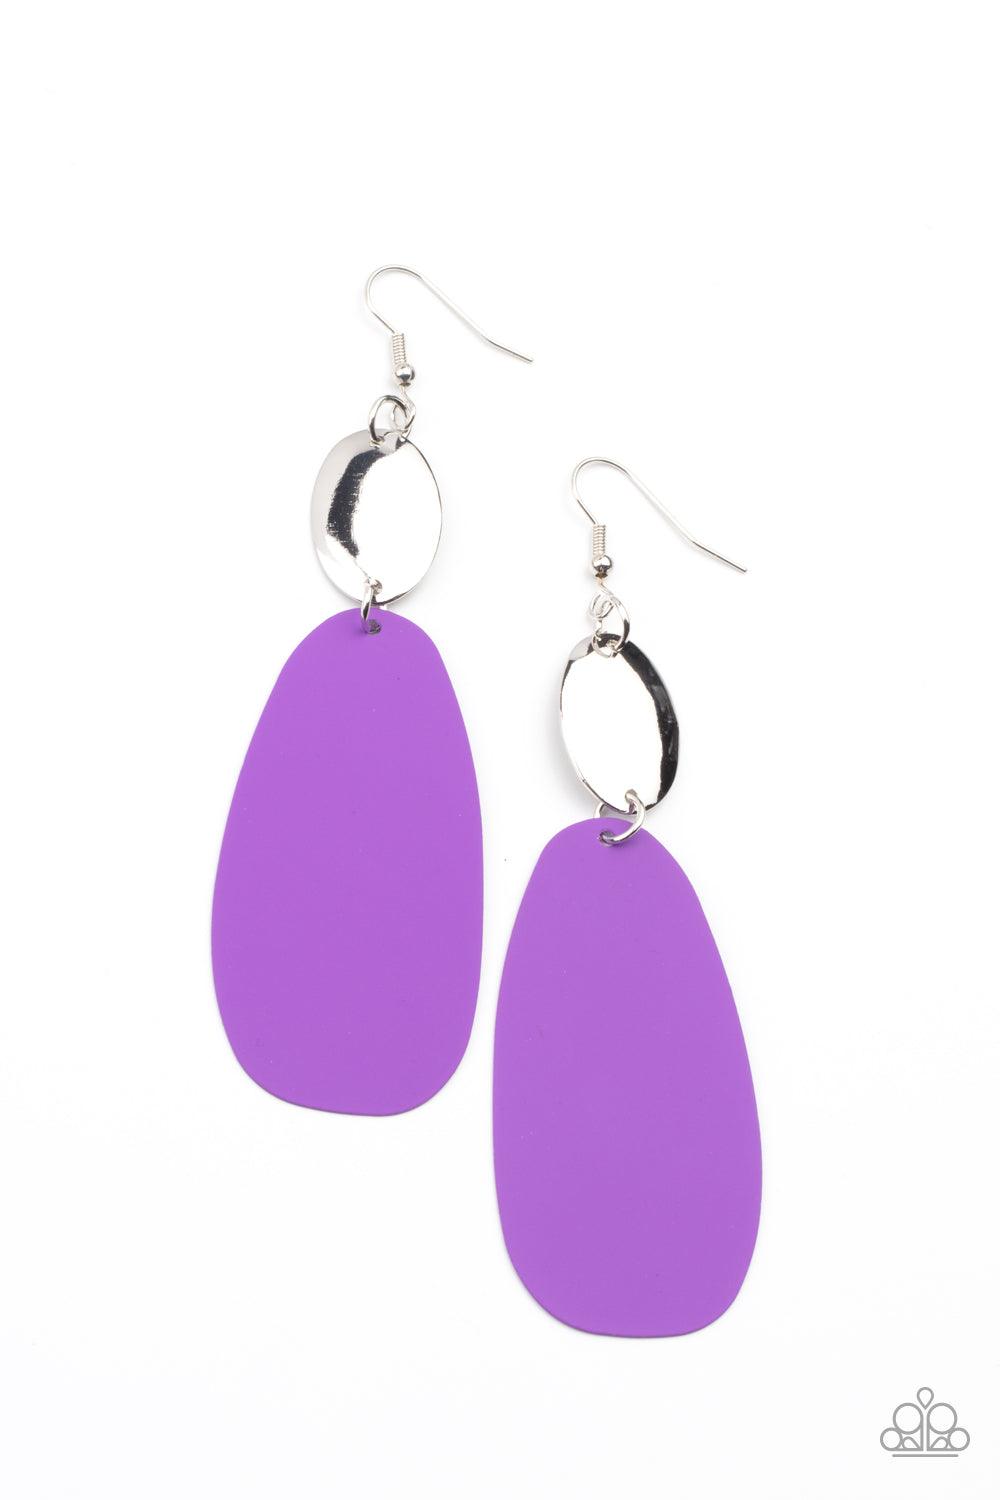 Paparazzi Accessories Vivaciously Vogue - Purple Featuring a matte finish, a vivacious purple frame swings from the bottom of an oval silver disc for a colorfully retro inspired look. Earring attaches to a standard fishhook fitting. Sold as one pair of ea